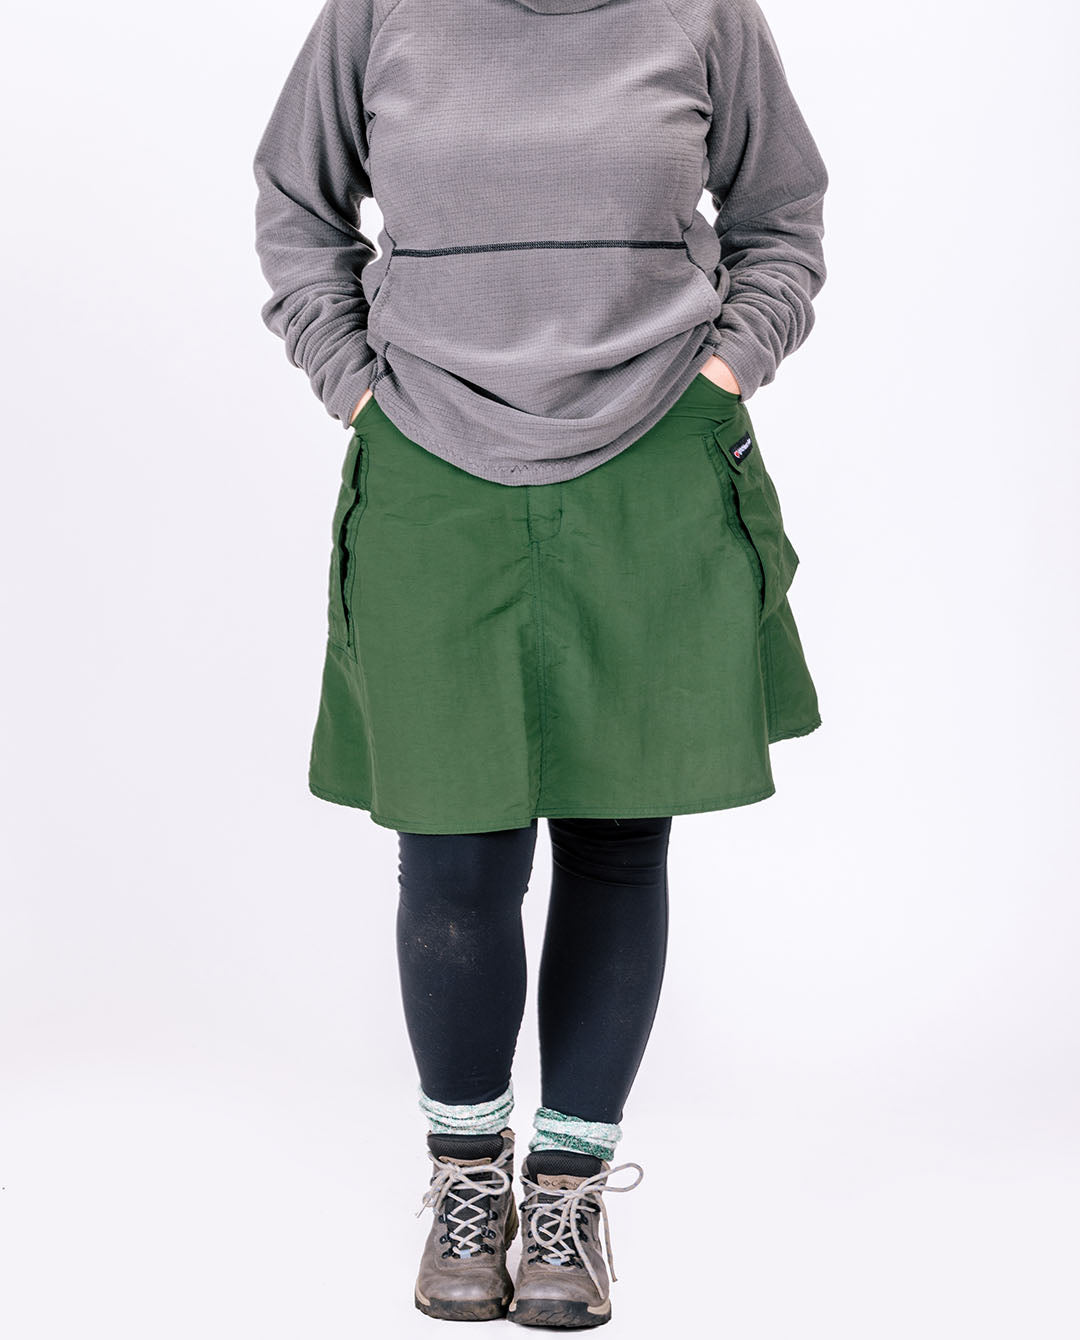 Large green hiking skirt with pockets for women and men shown with leggings.